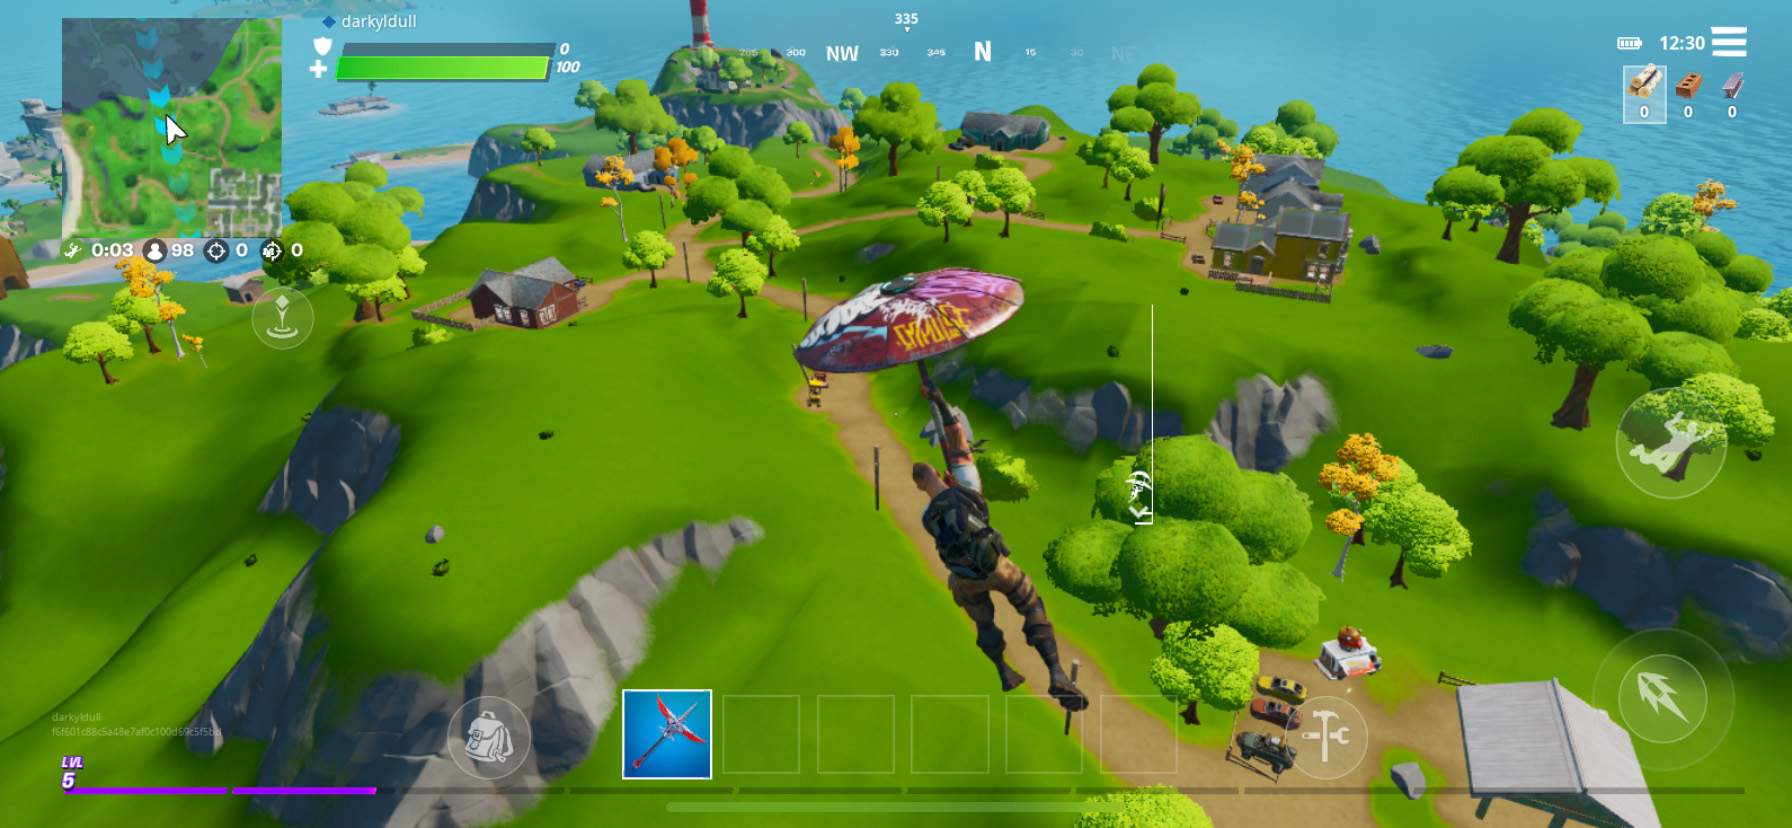 Fortnite Mobile for Android - Tips and Tricks for Staying Alive and  Outplaying Your Enemies | BlueStacks